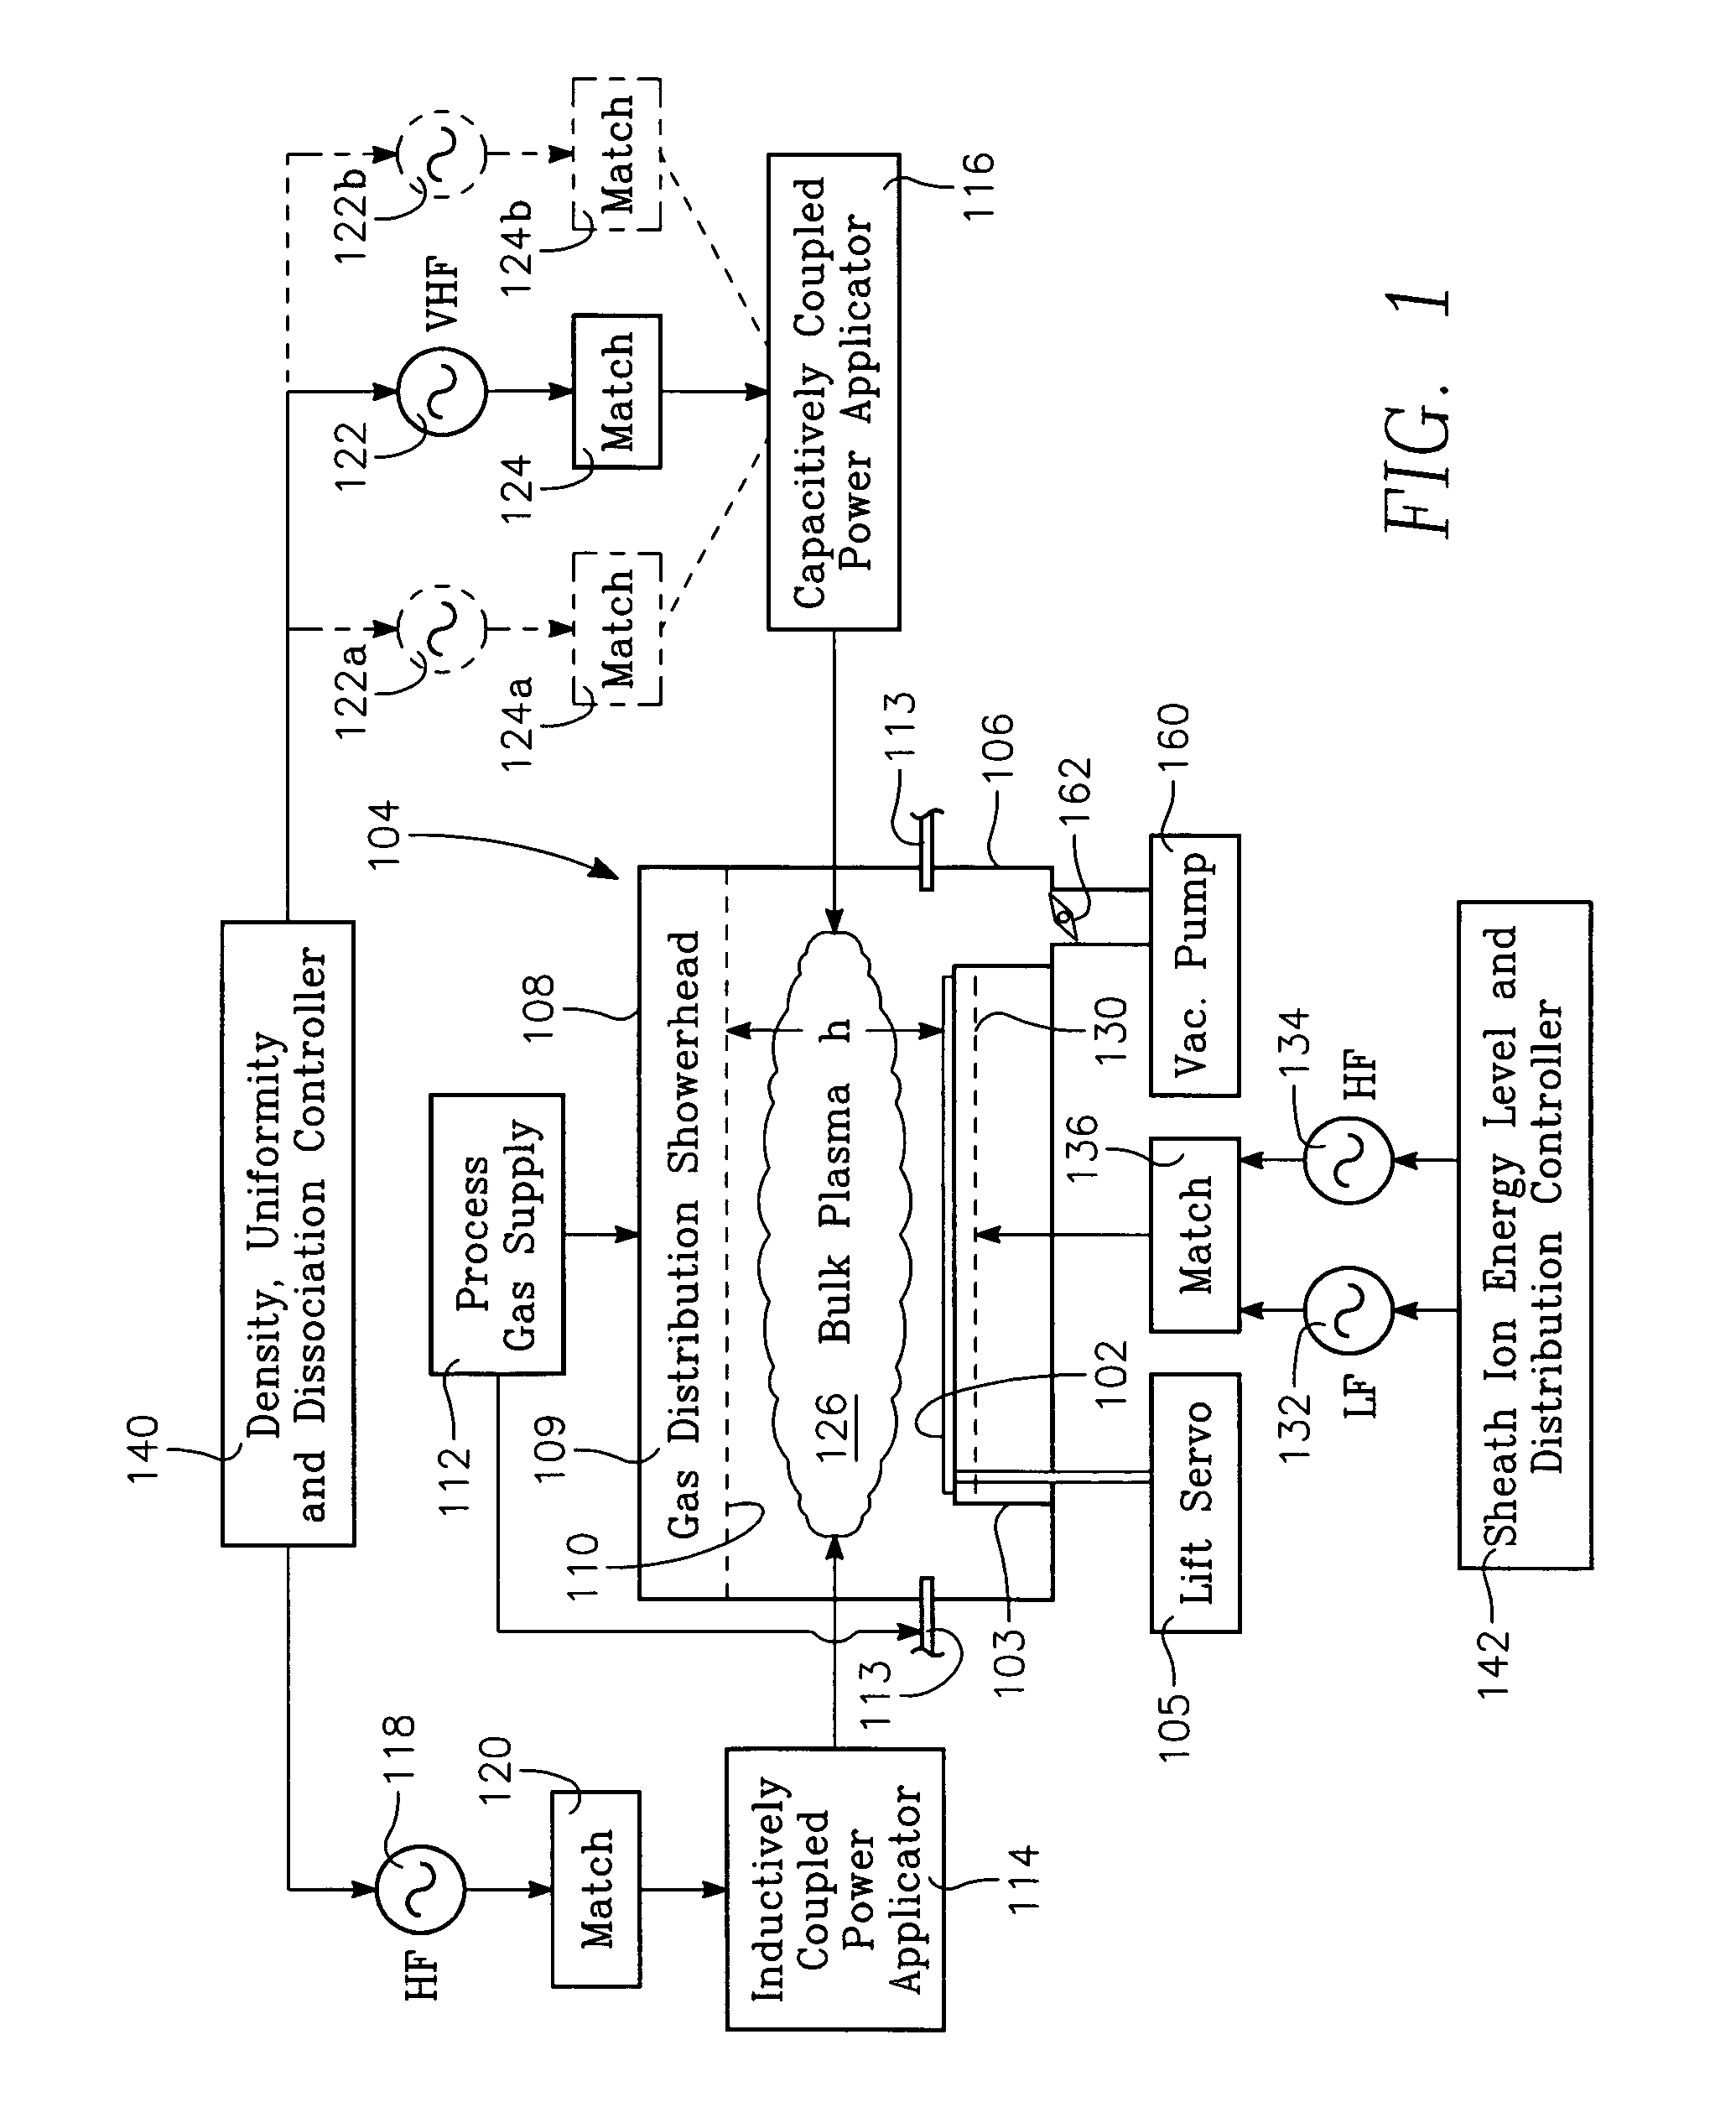 Plasma reactor apparatus with independent capacitive and toroidal plasma sources